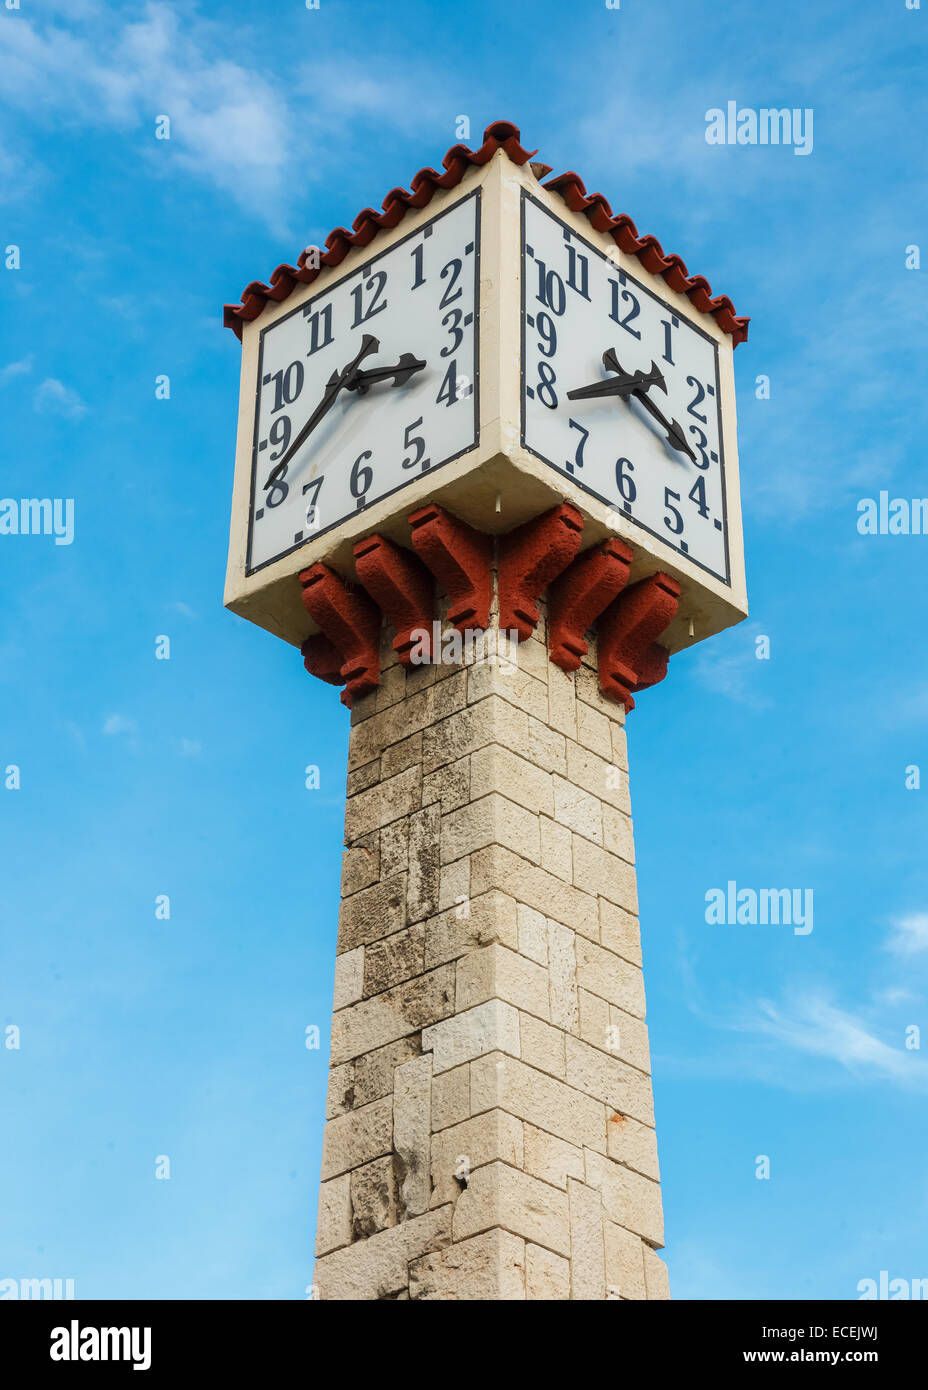 Old tower clock in Piraeus, Greece with blue sky as a background Stock Photo